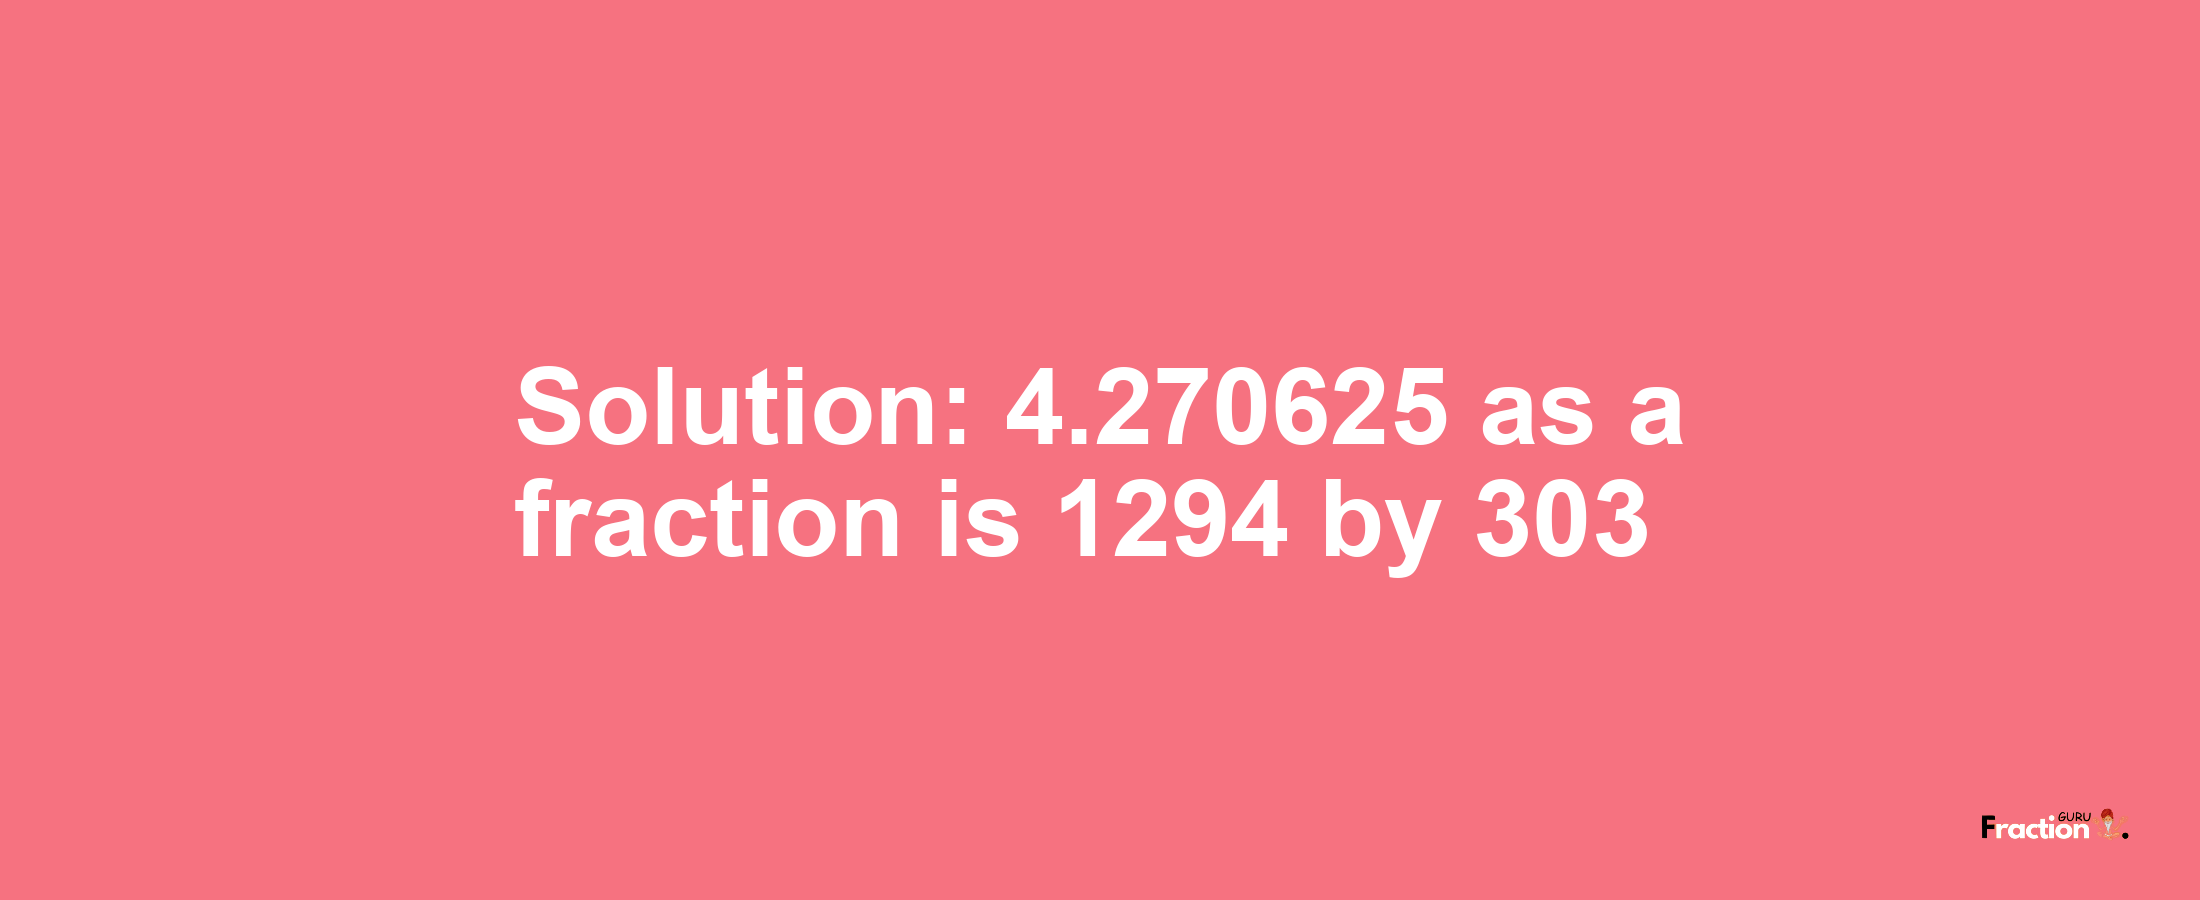 Solution:4.270625 as a fraction is 1294/303